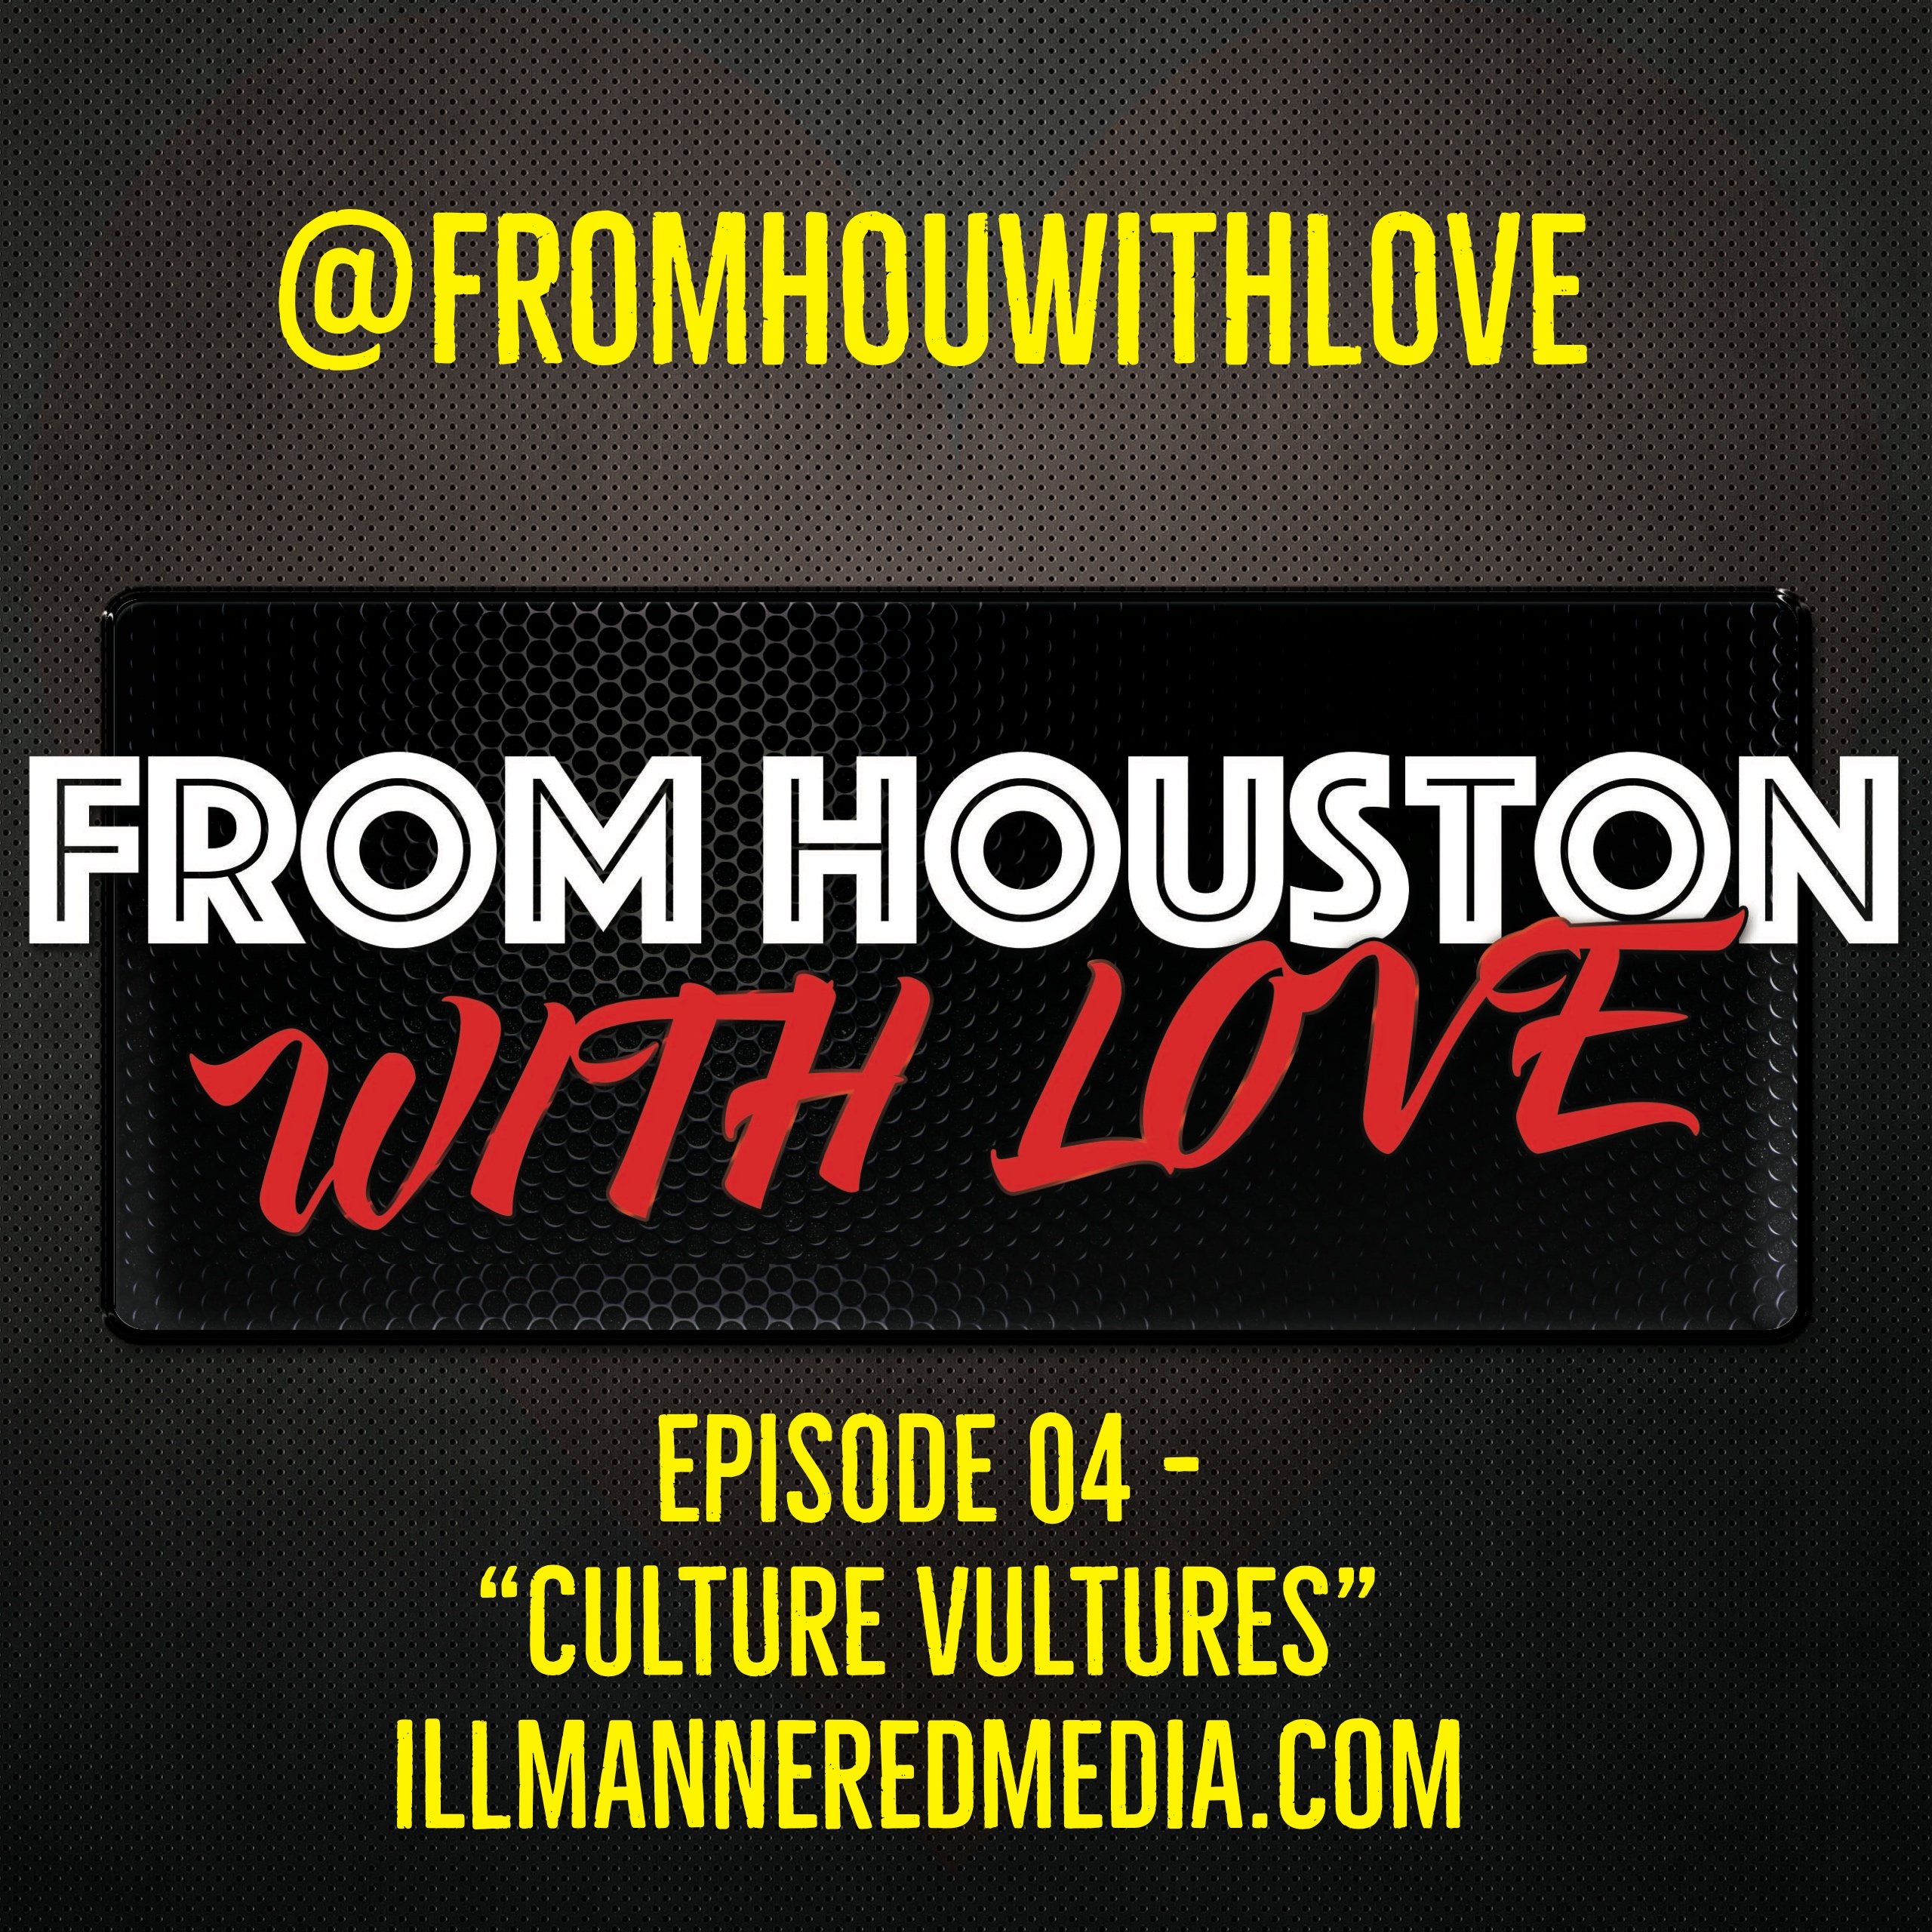 From Houston With Love (Podcast): Episode 04 – “Culture Vultures”